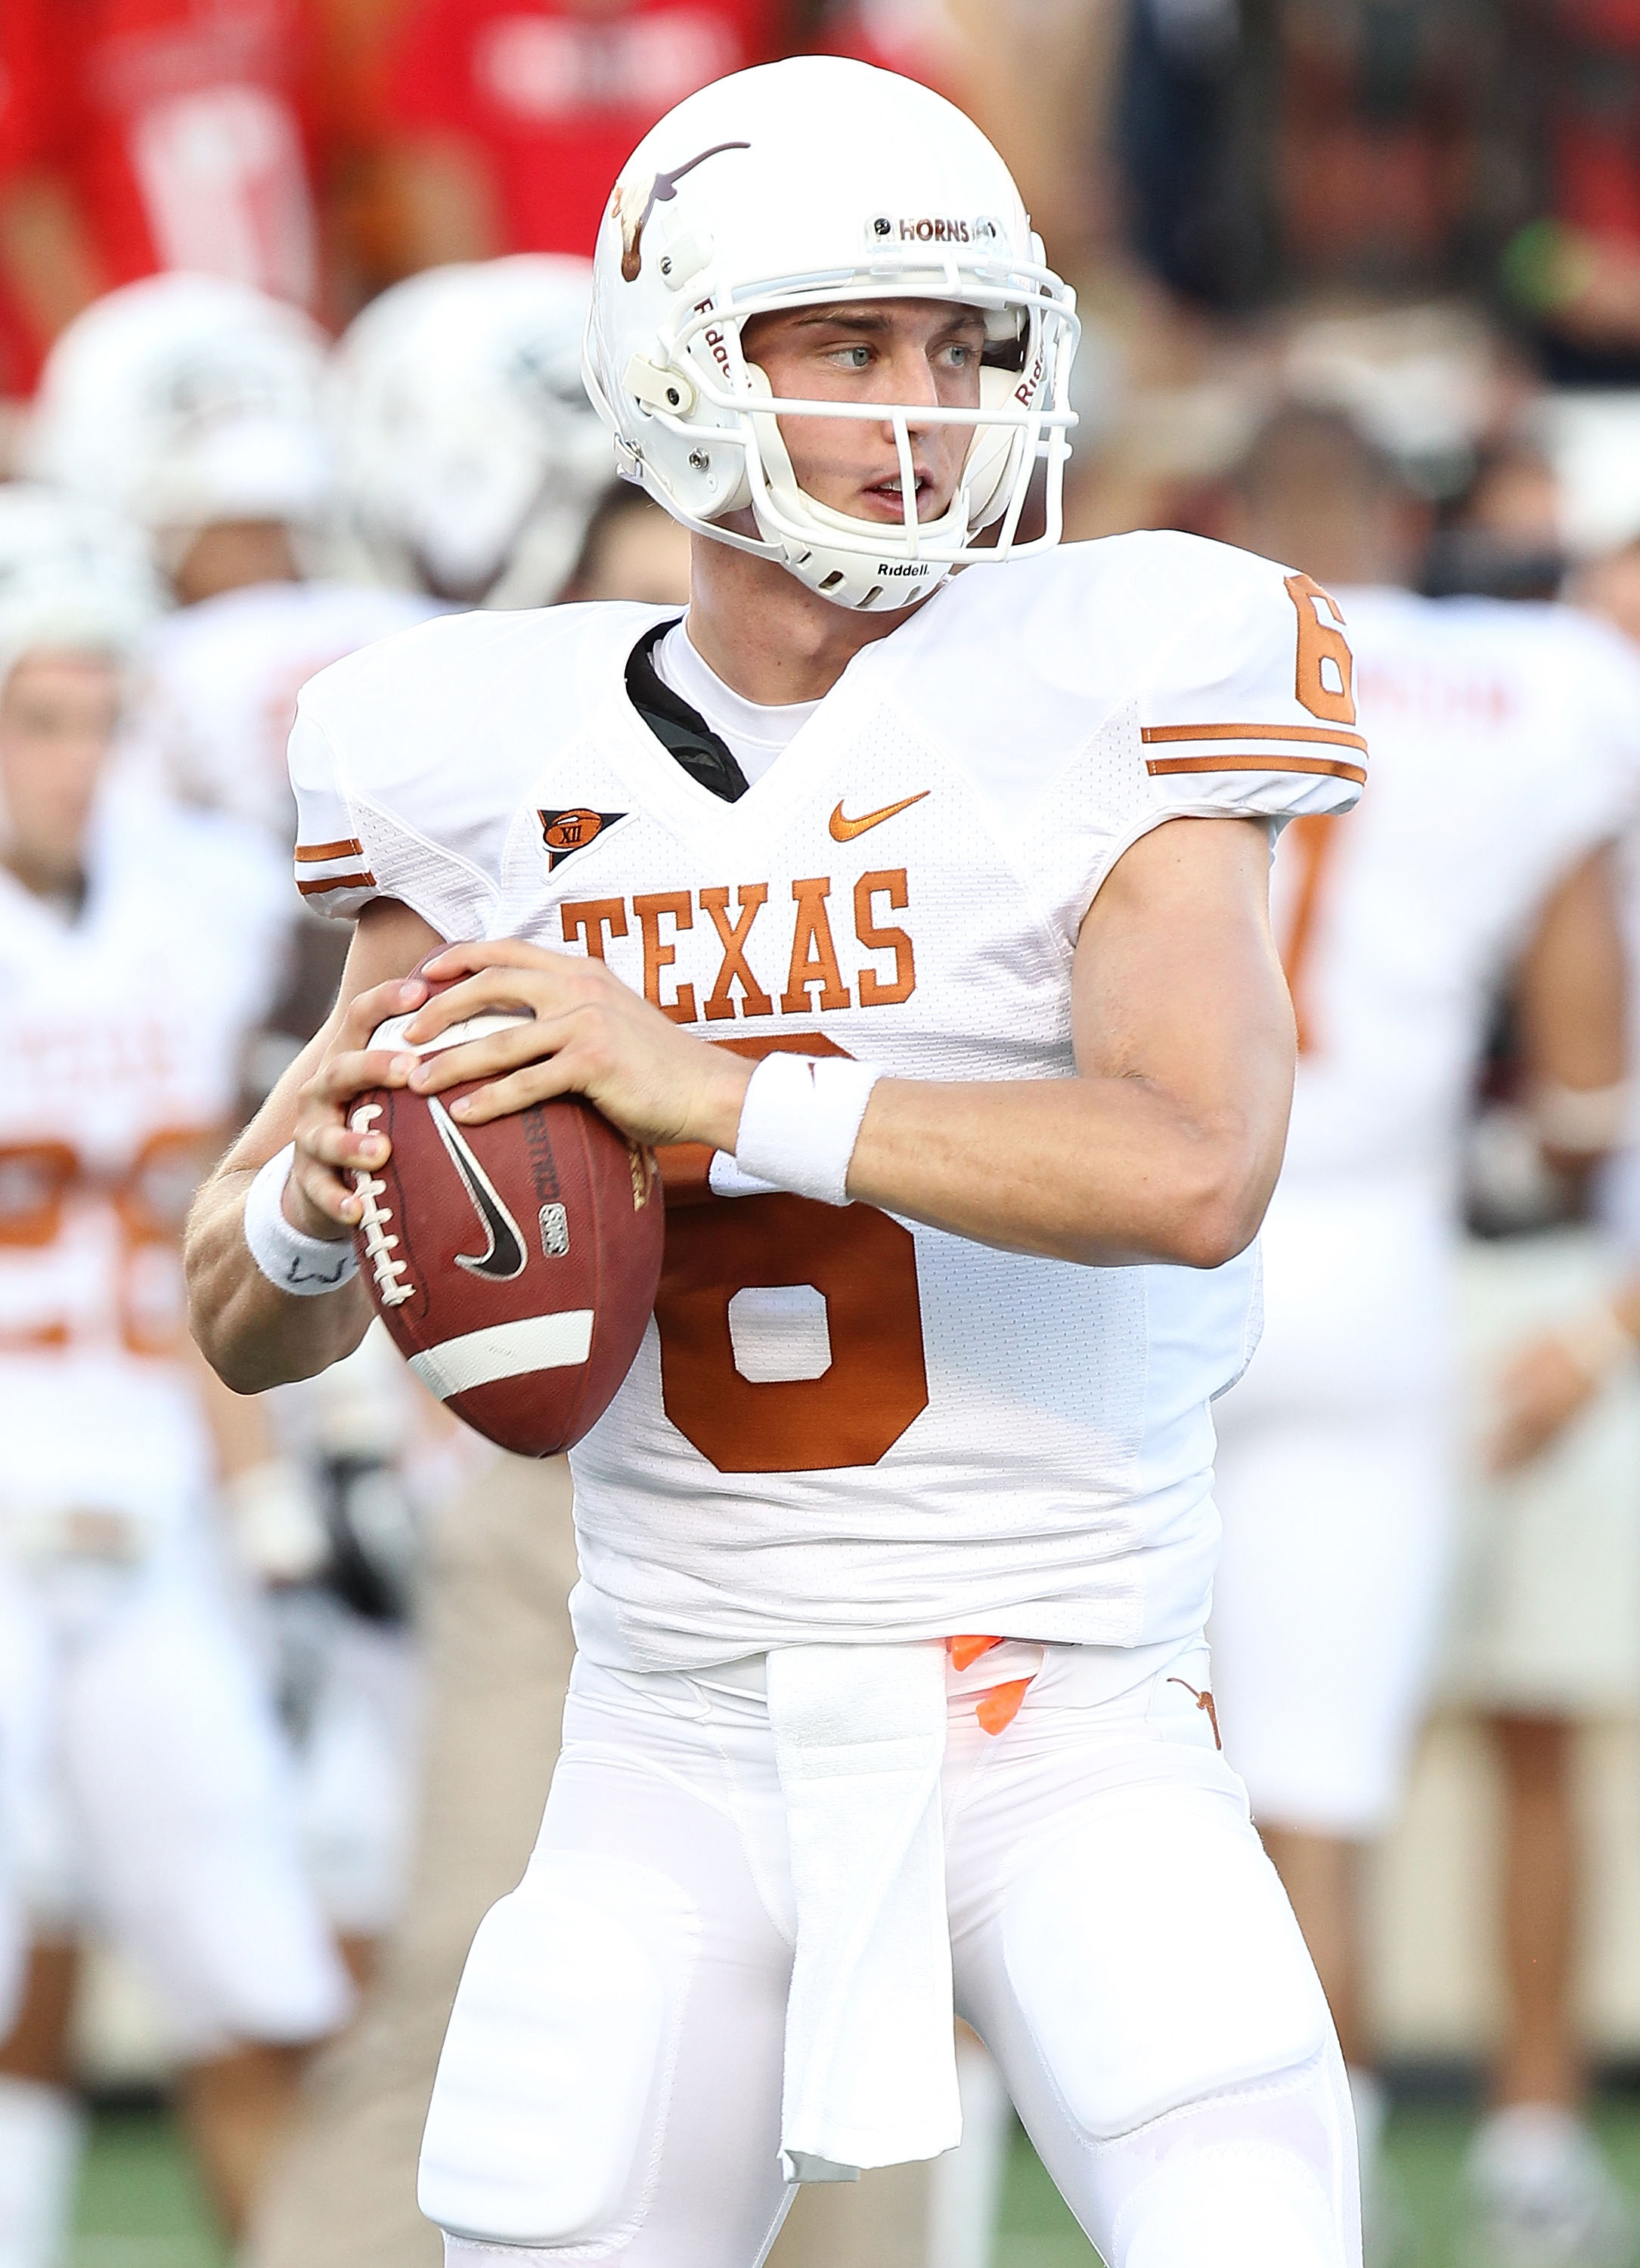 LUBBOCK, TX - SEPTEMBER 18:  Quarterback Case McCoy #6 of the Texas Longhorns at Jones AT&T Stadium on September 18, 2010 in Lubbock, Texas.  (Photo by Ronald Martinez/Getty Images)